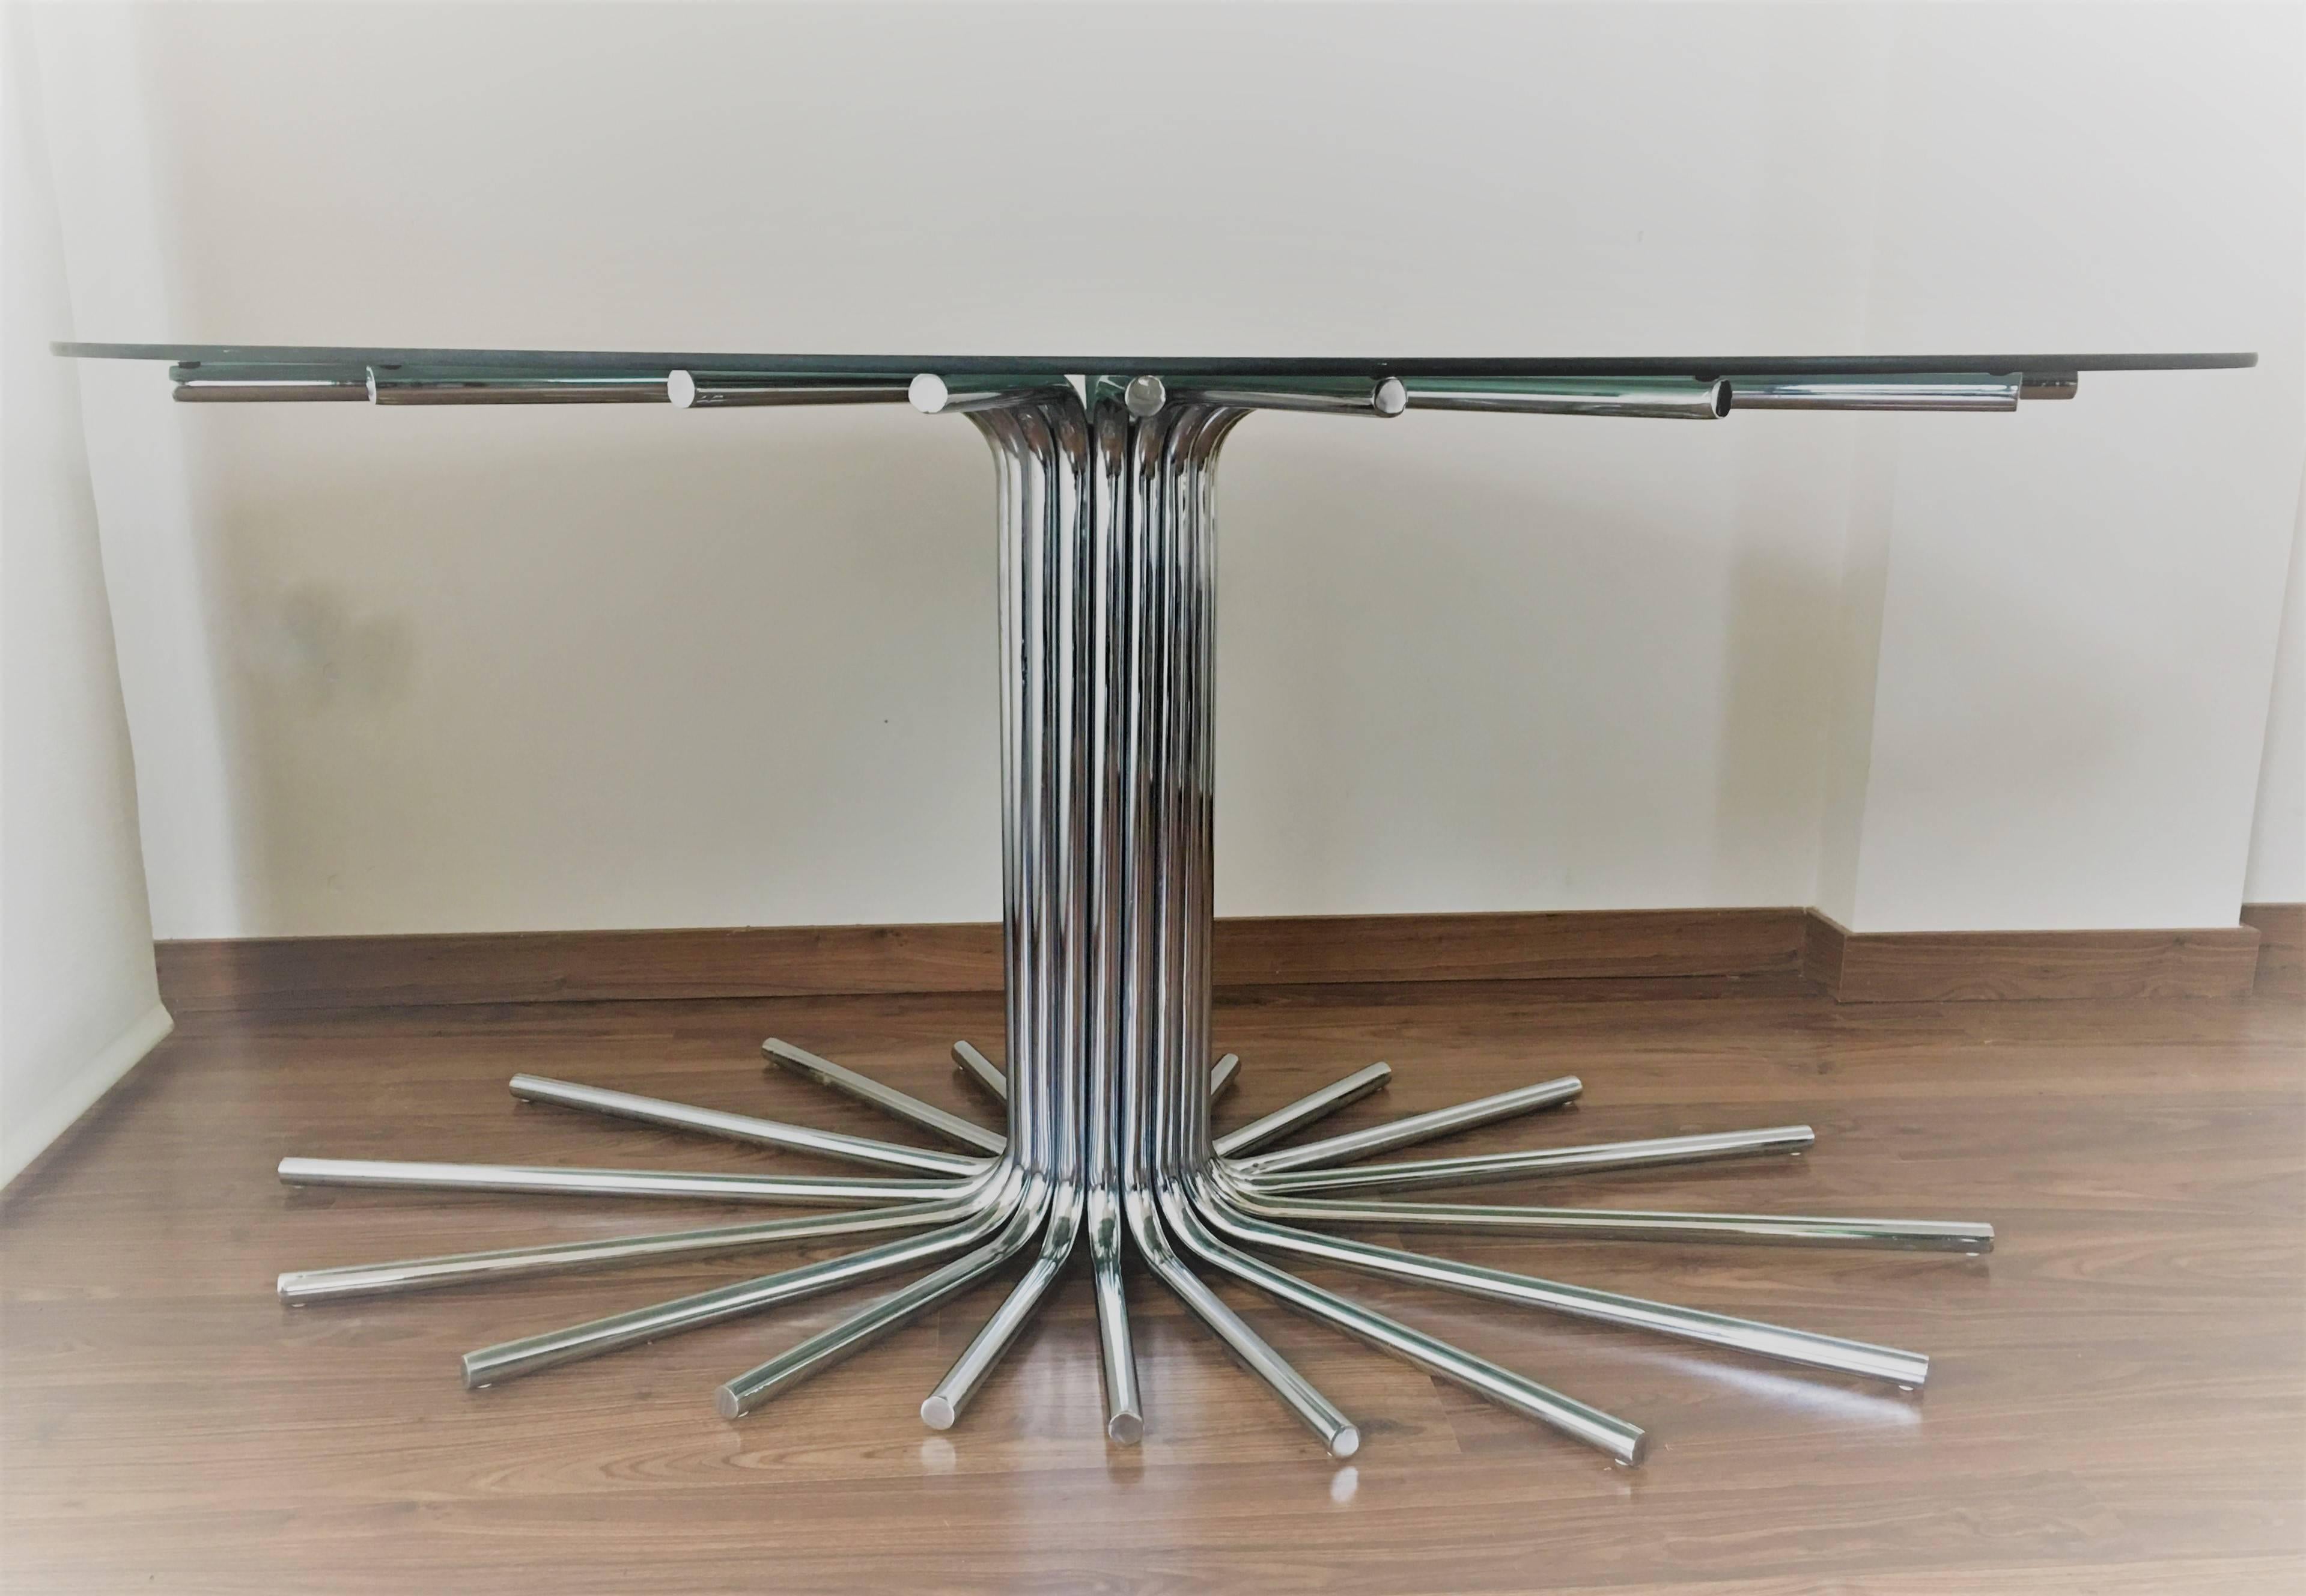 Mid-Century chrome star base table with smoked glass Oval top in the manner Gastone Rinaldi. Chrome in nice condition. 
Spectacular mid-century chrome starburst dining table with smoked glass top. This table allows for a guaranteed match to your